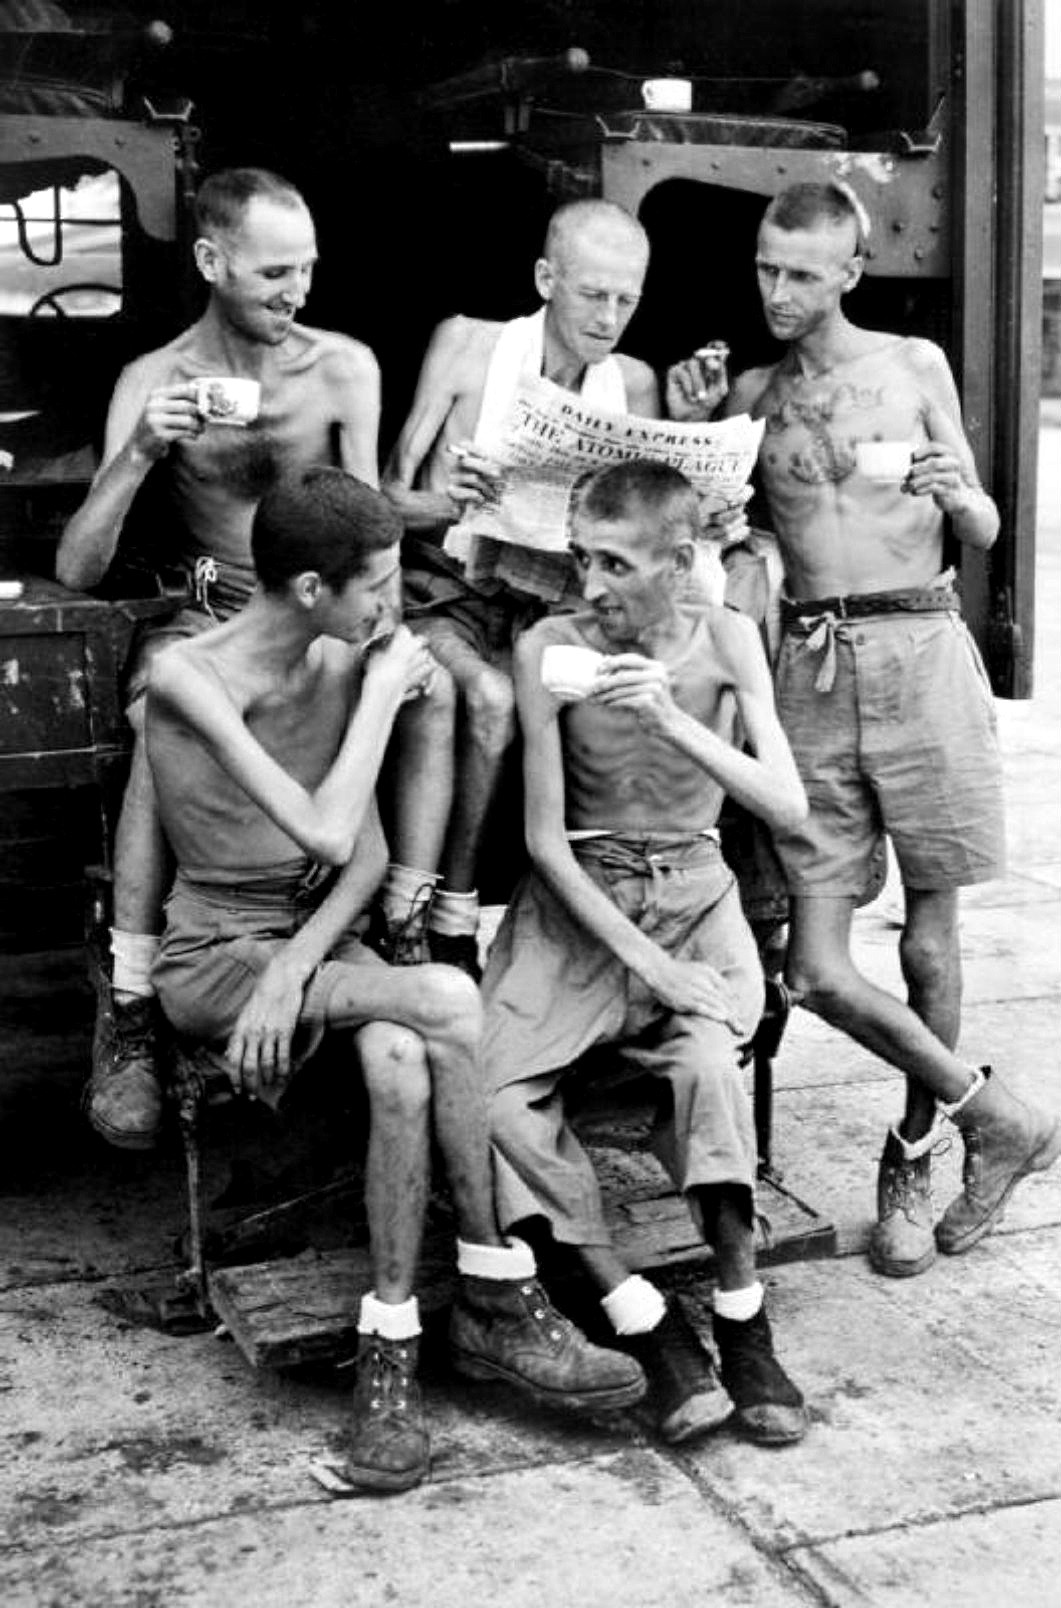 Five Australian former POWs catch up on news about the atomic bombings, after their release from Japanese captivity in Singapore, Sep 1945